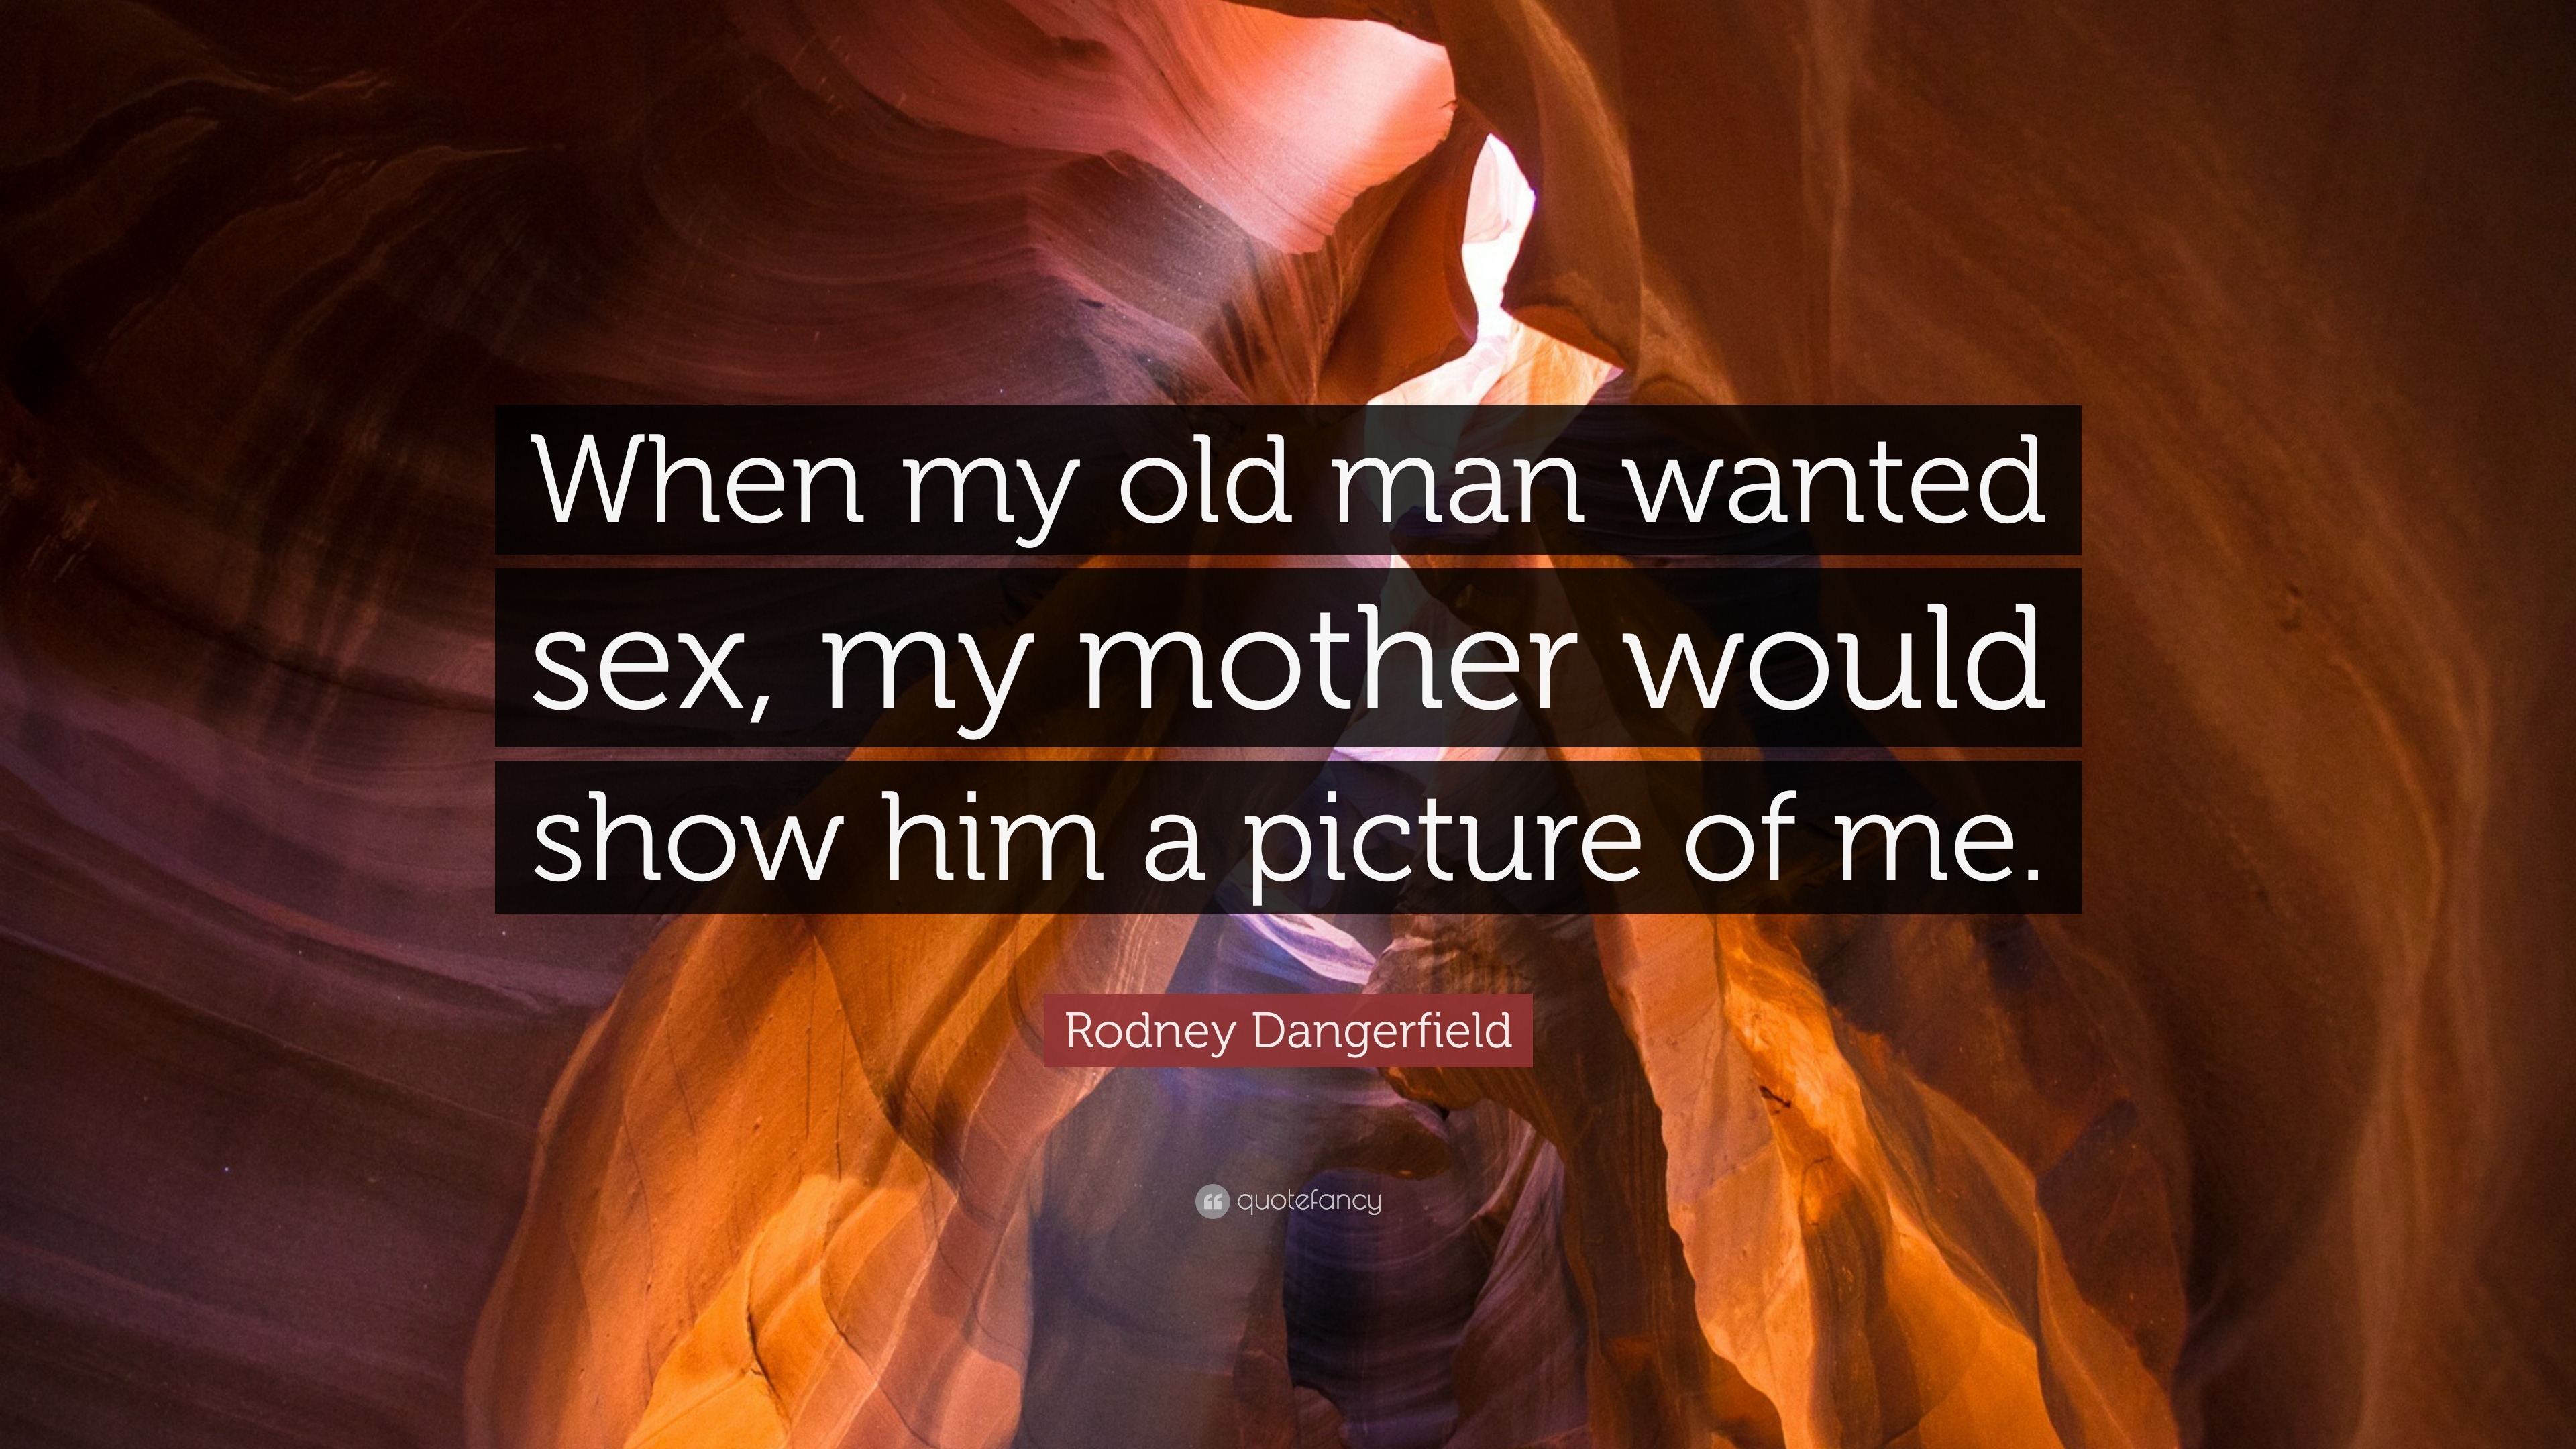 Rodney Dangerfield Quote “When my old man wanted my mother would show